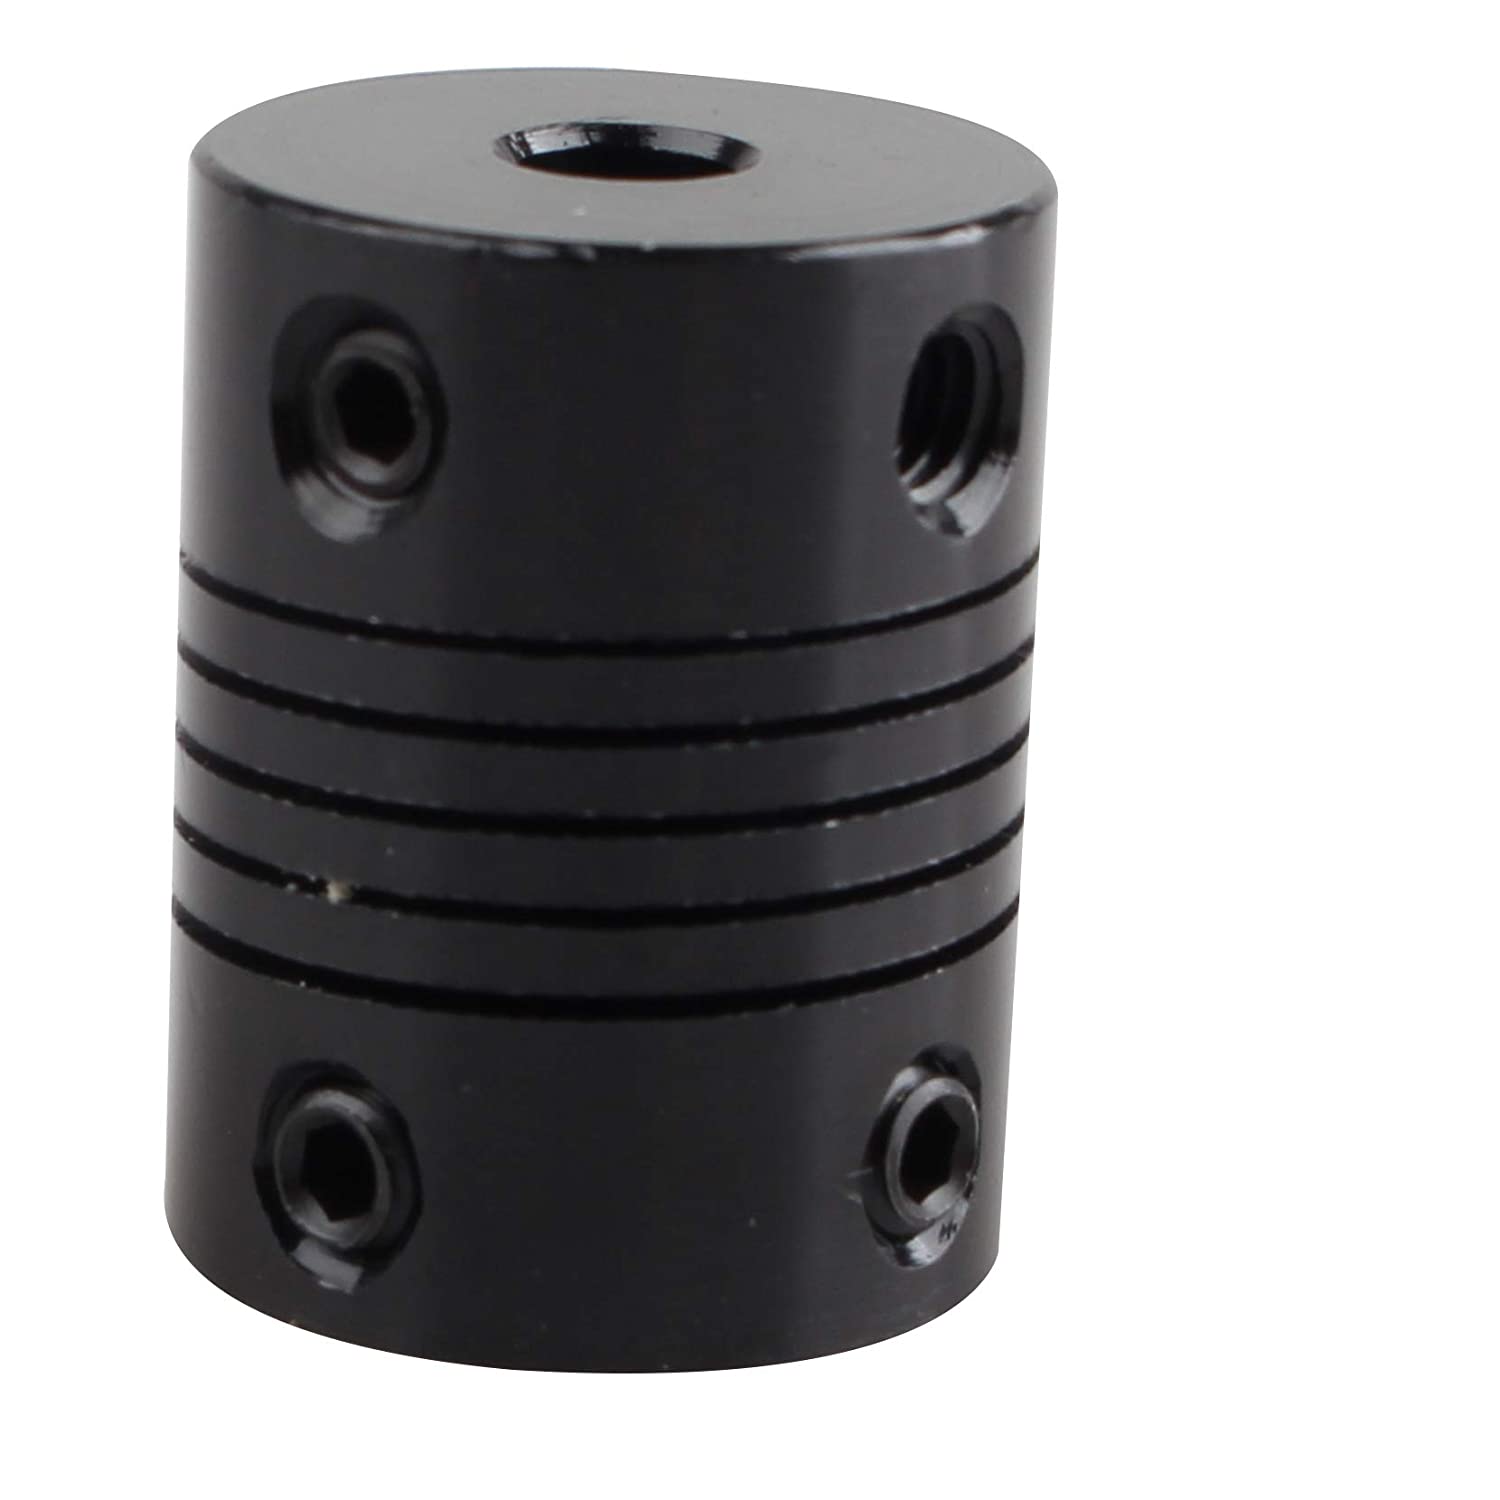 Pack of 4 Black Flexible Shaft Stepper Motor Couplers (Available in 5x5mm & 5x8mm)